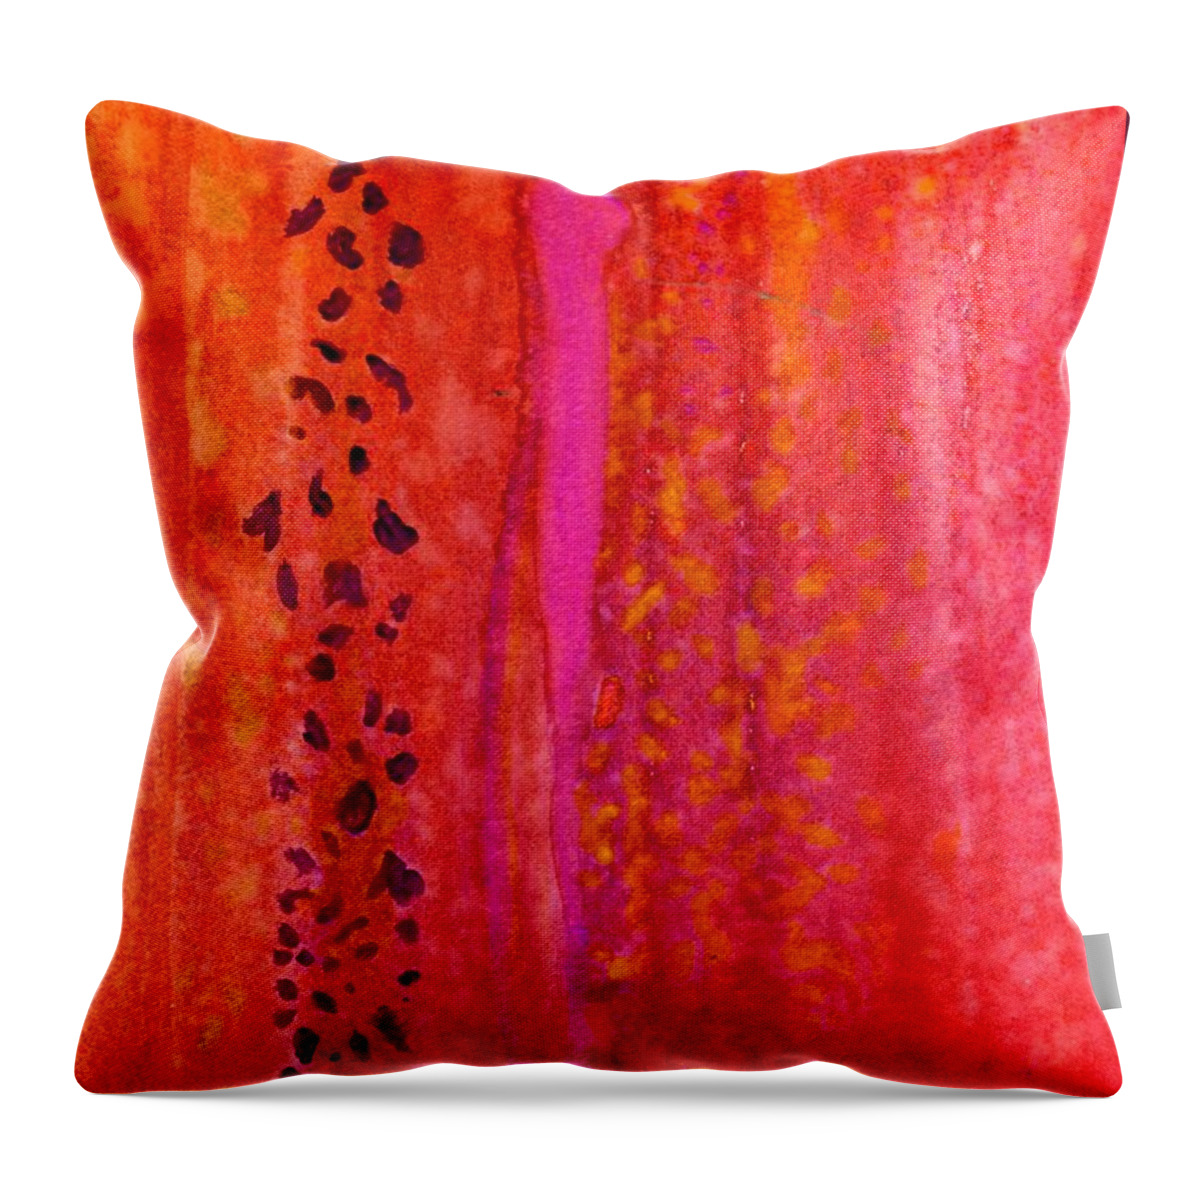 Aflutter Throw Pillow featuring the painting Aflutter by Desiree Paquette